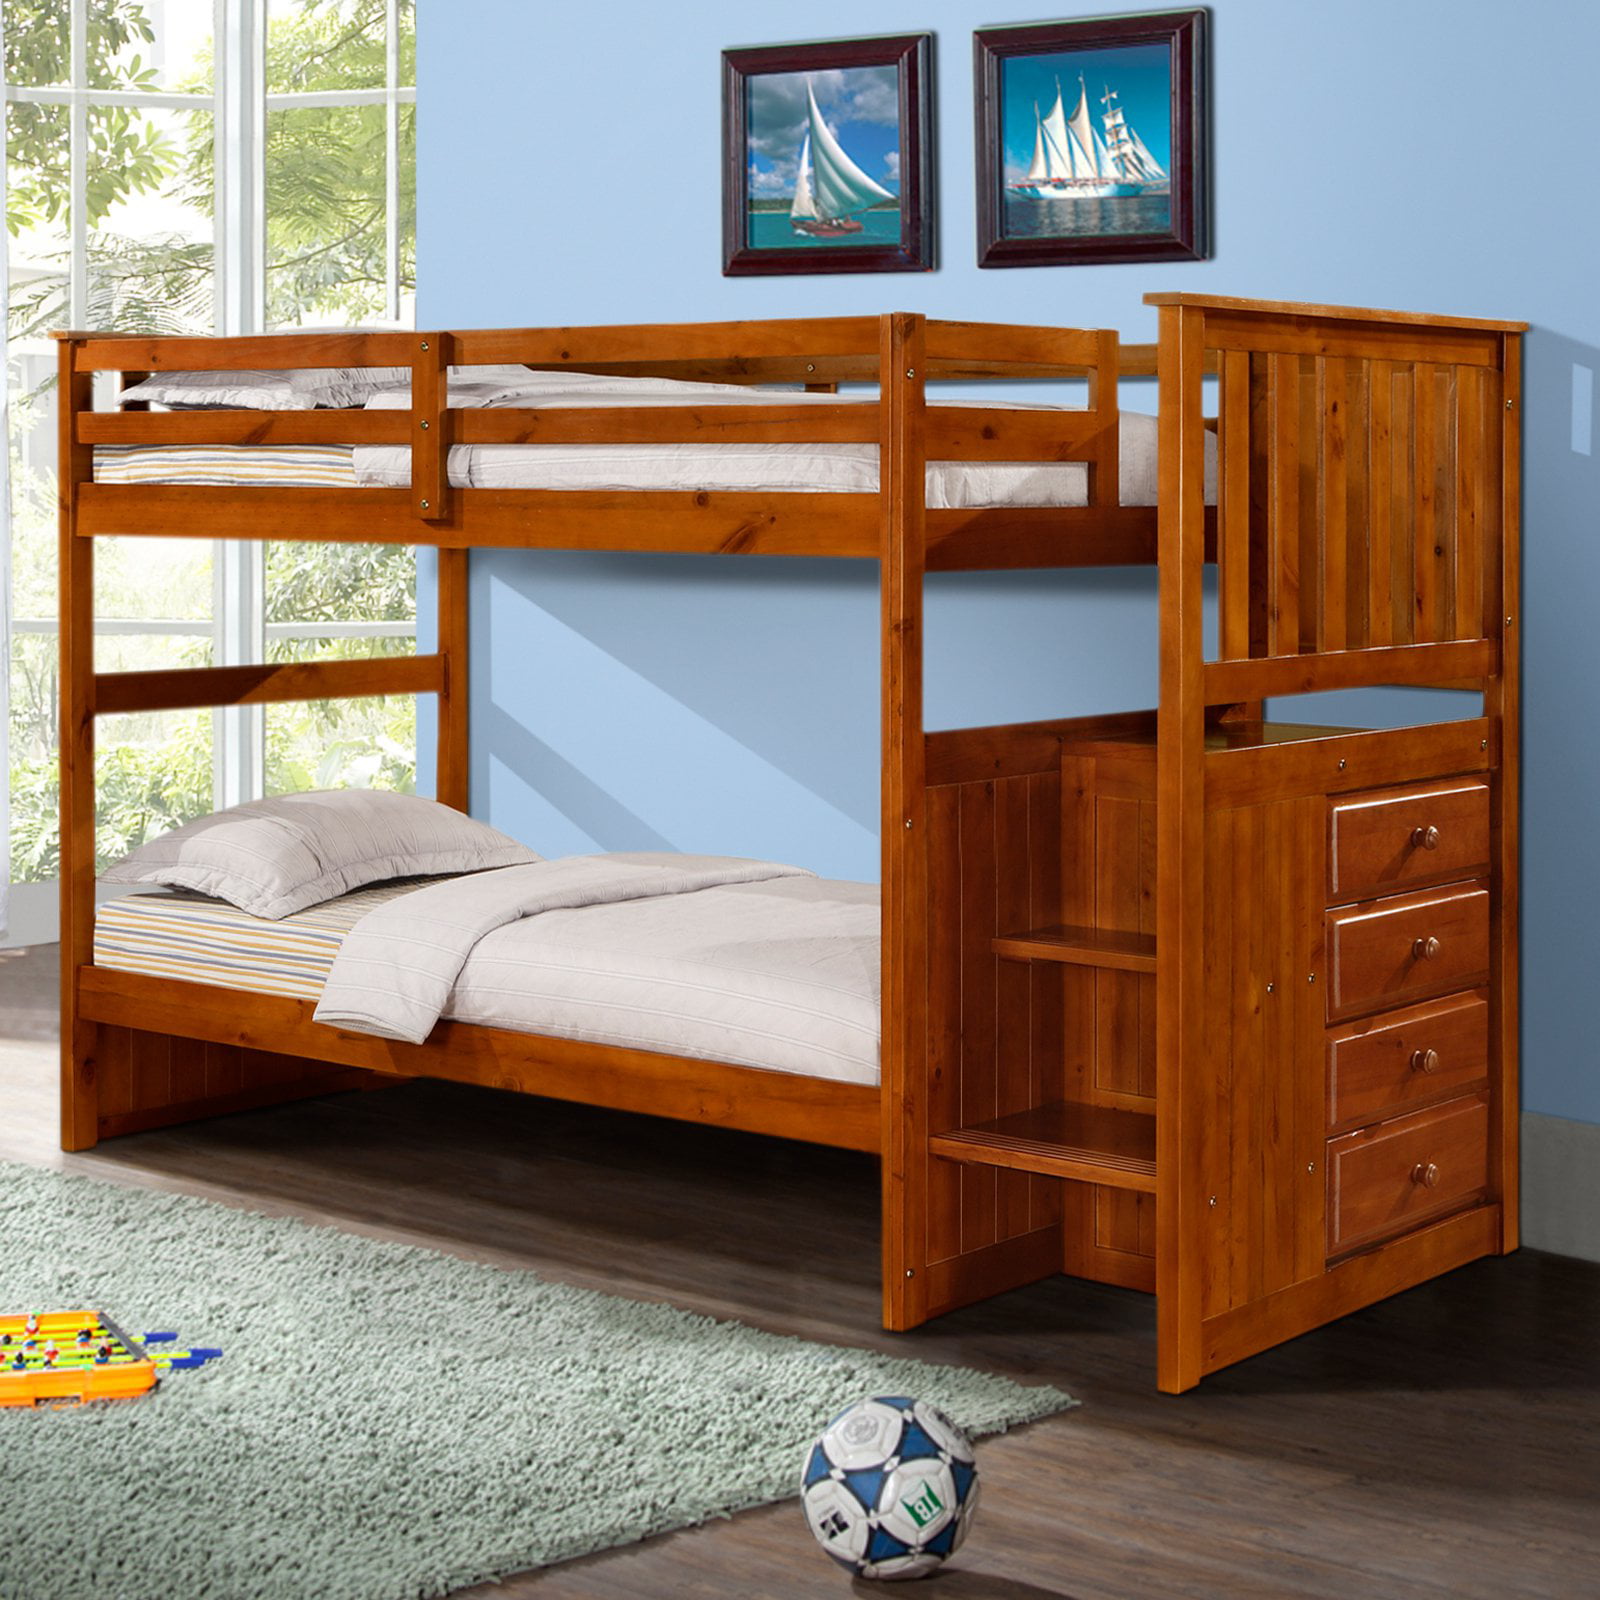 Donco Twin Over Mission Stairway, Woodcrest Bunk Beds With Stairs